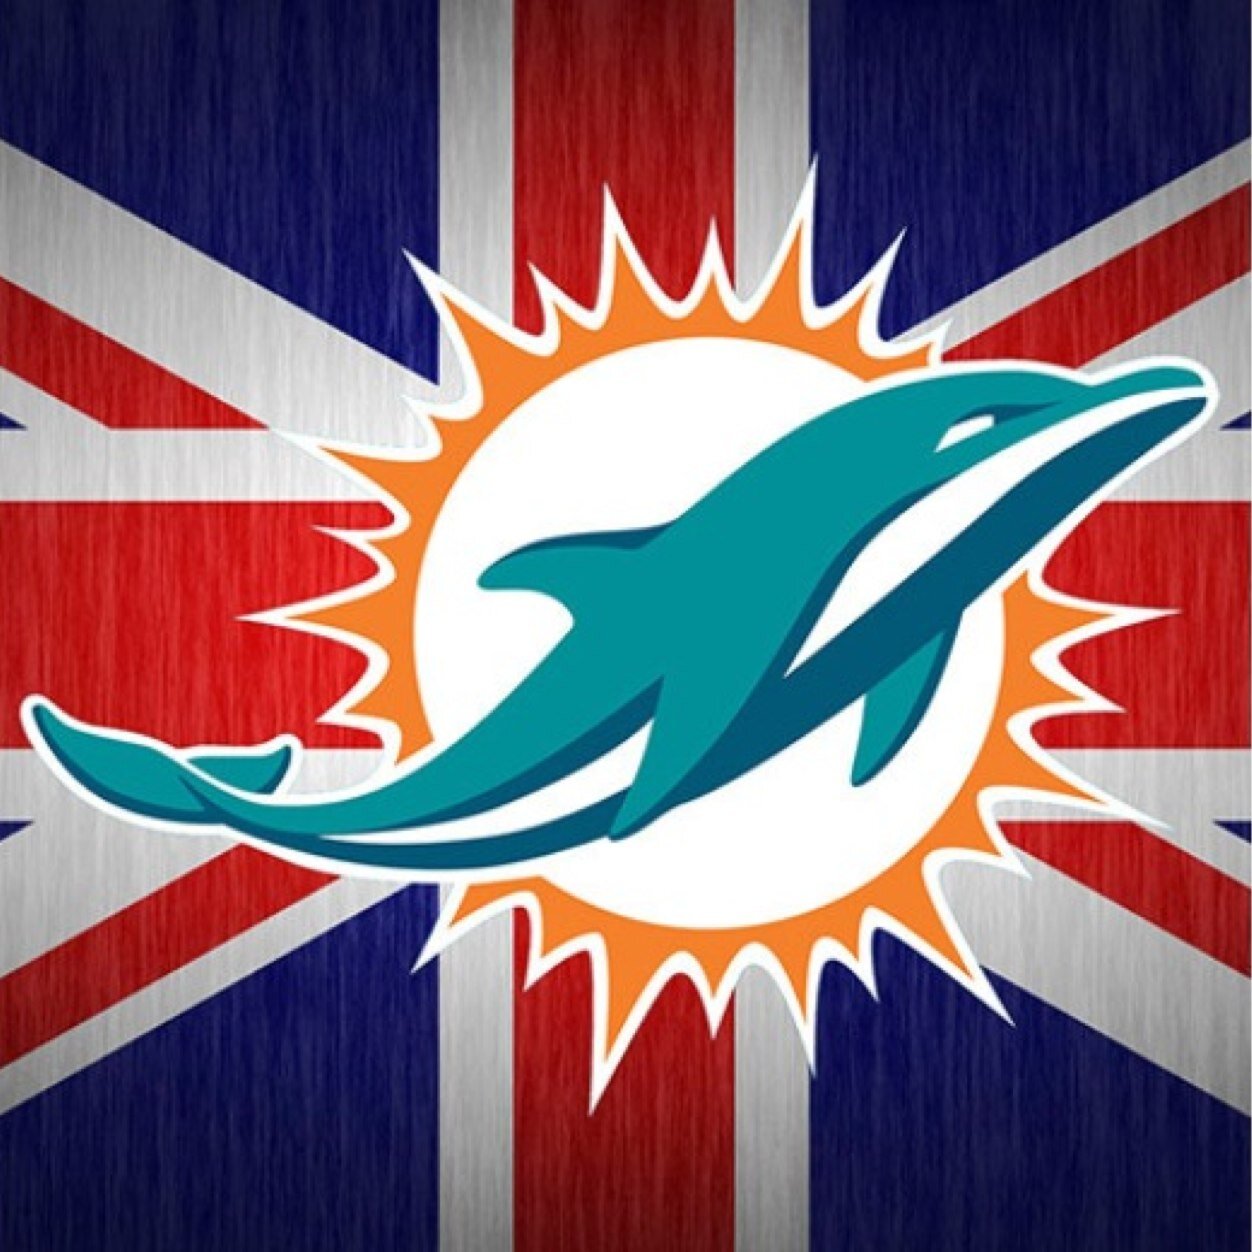 The Miami Dolphins are the British Public's favorite NFL team